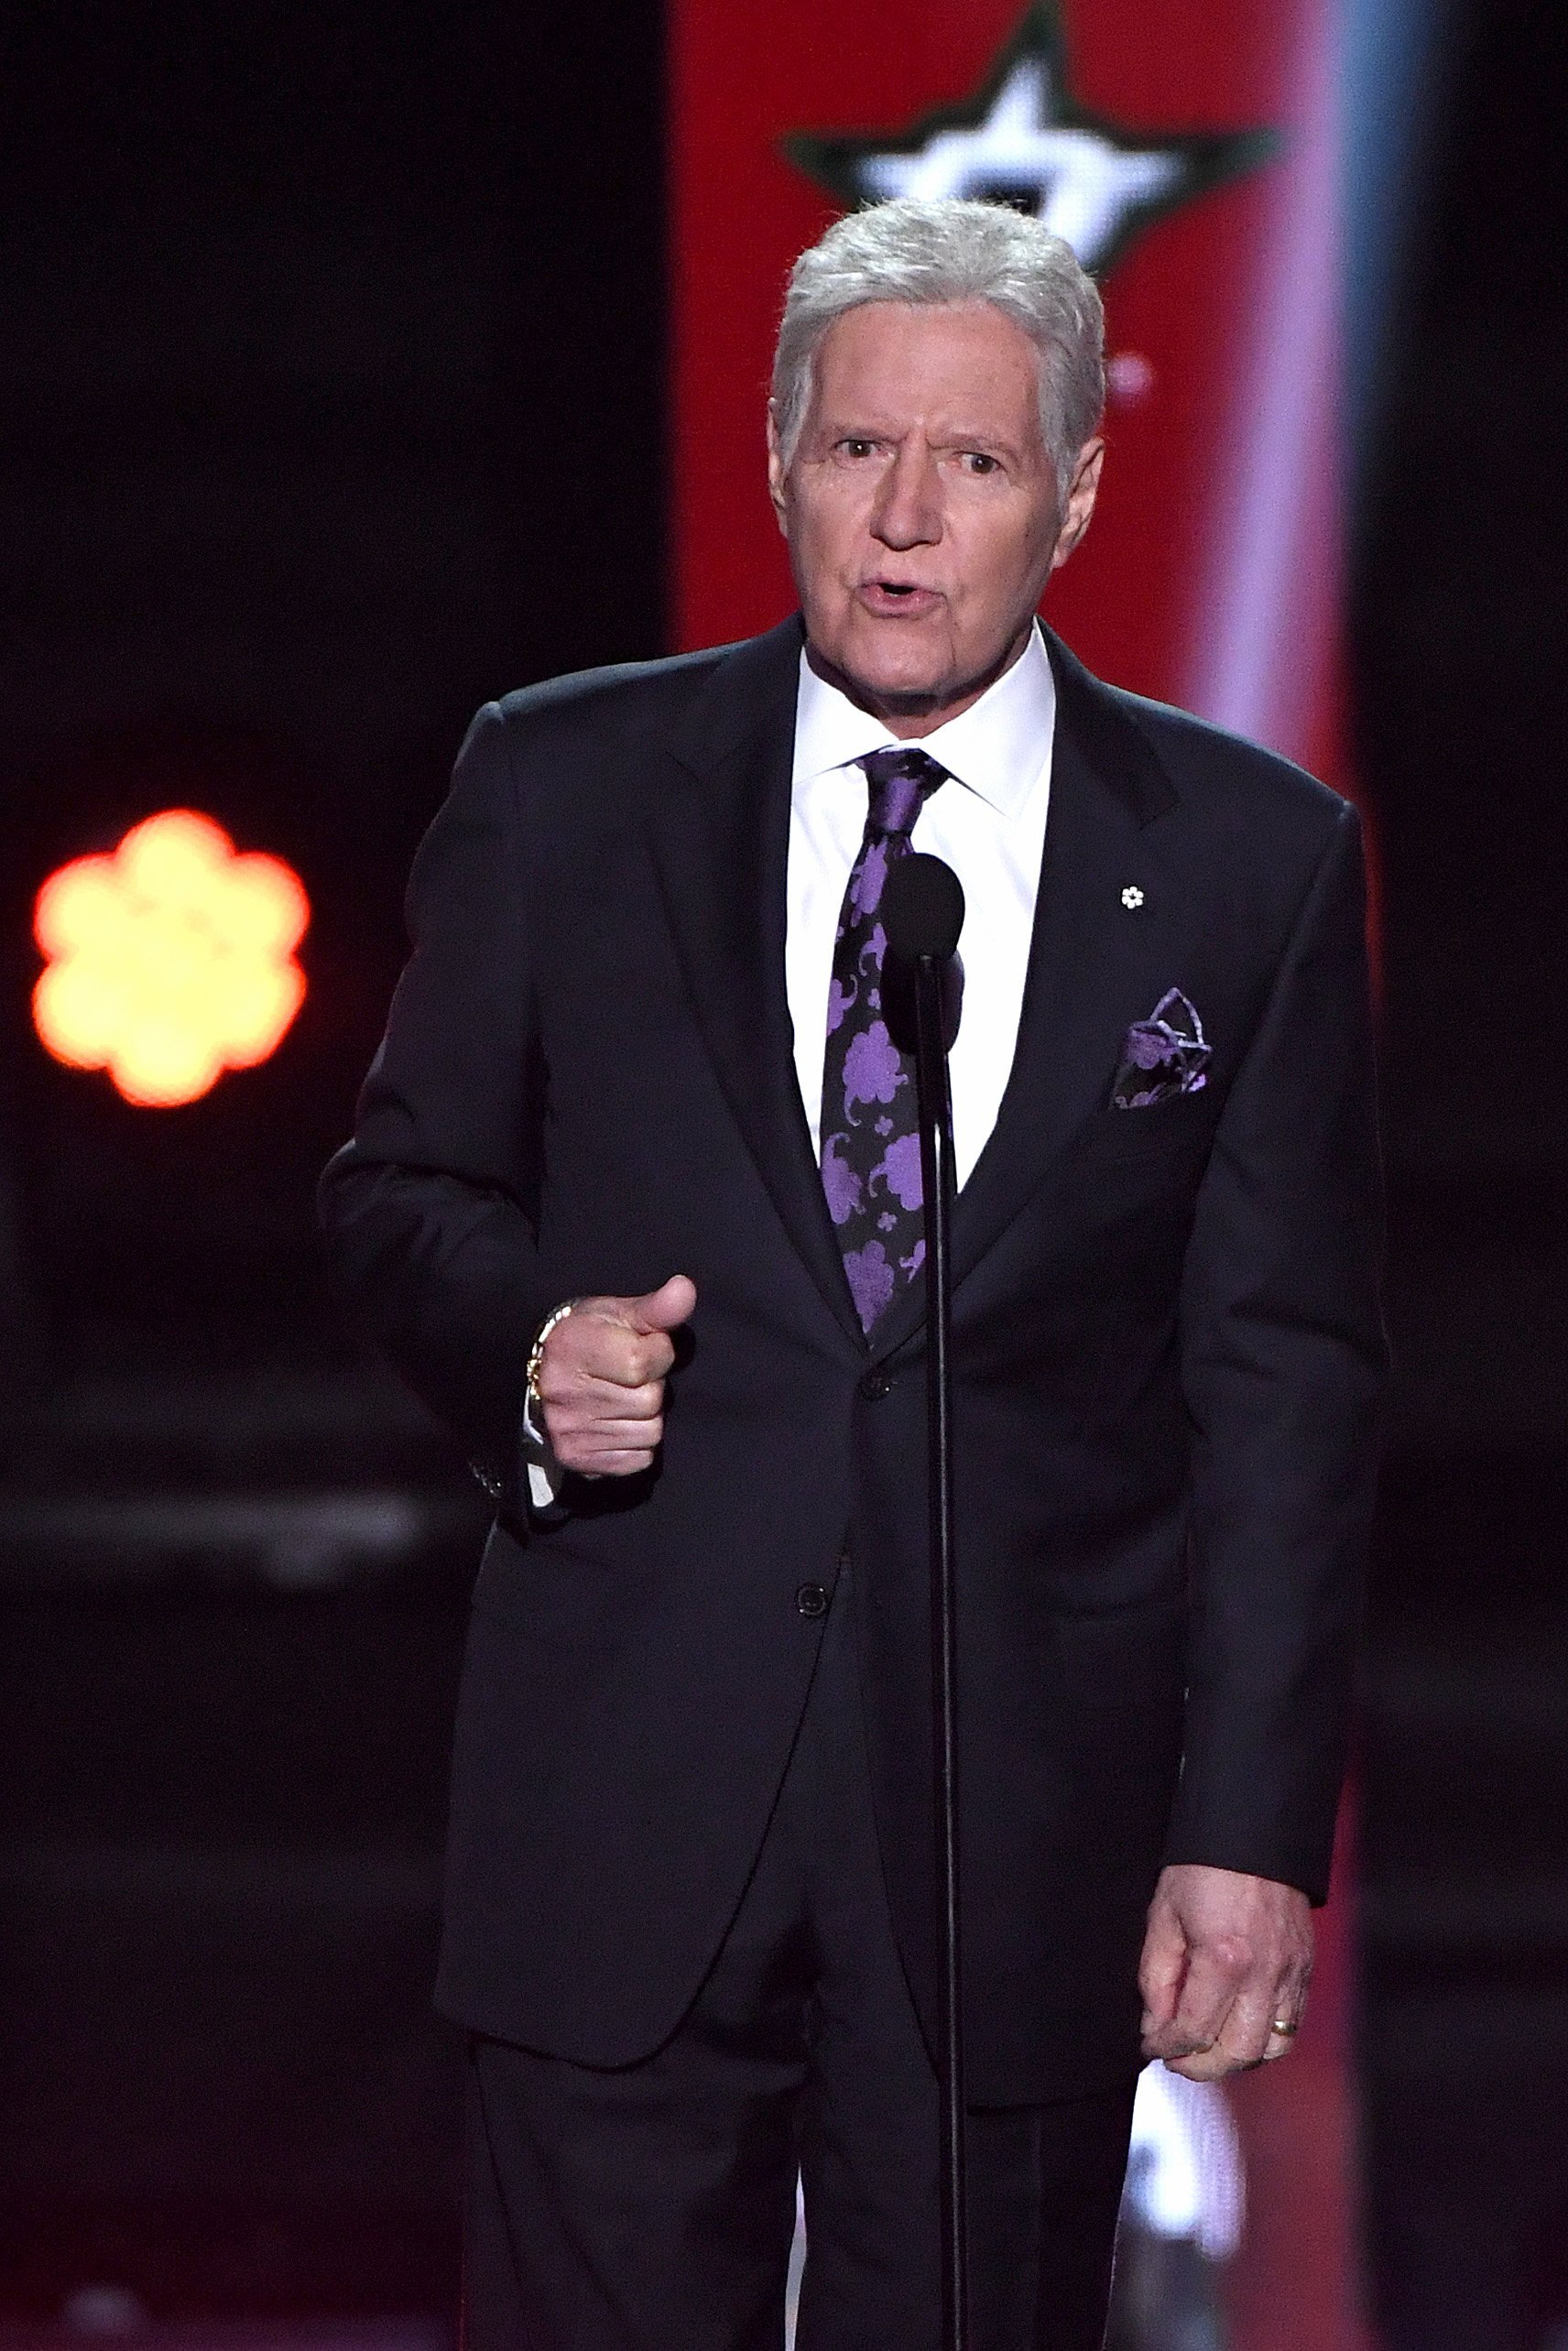 Alex Trebek presents the Hart Memorial Trophy during the 2019 NHL Awards on June 19, 2019, in Las Vegas, Nevada. | Photo: Getty Images.